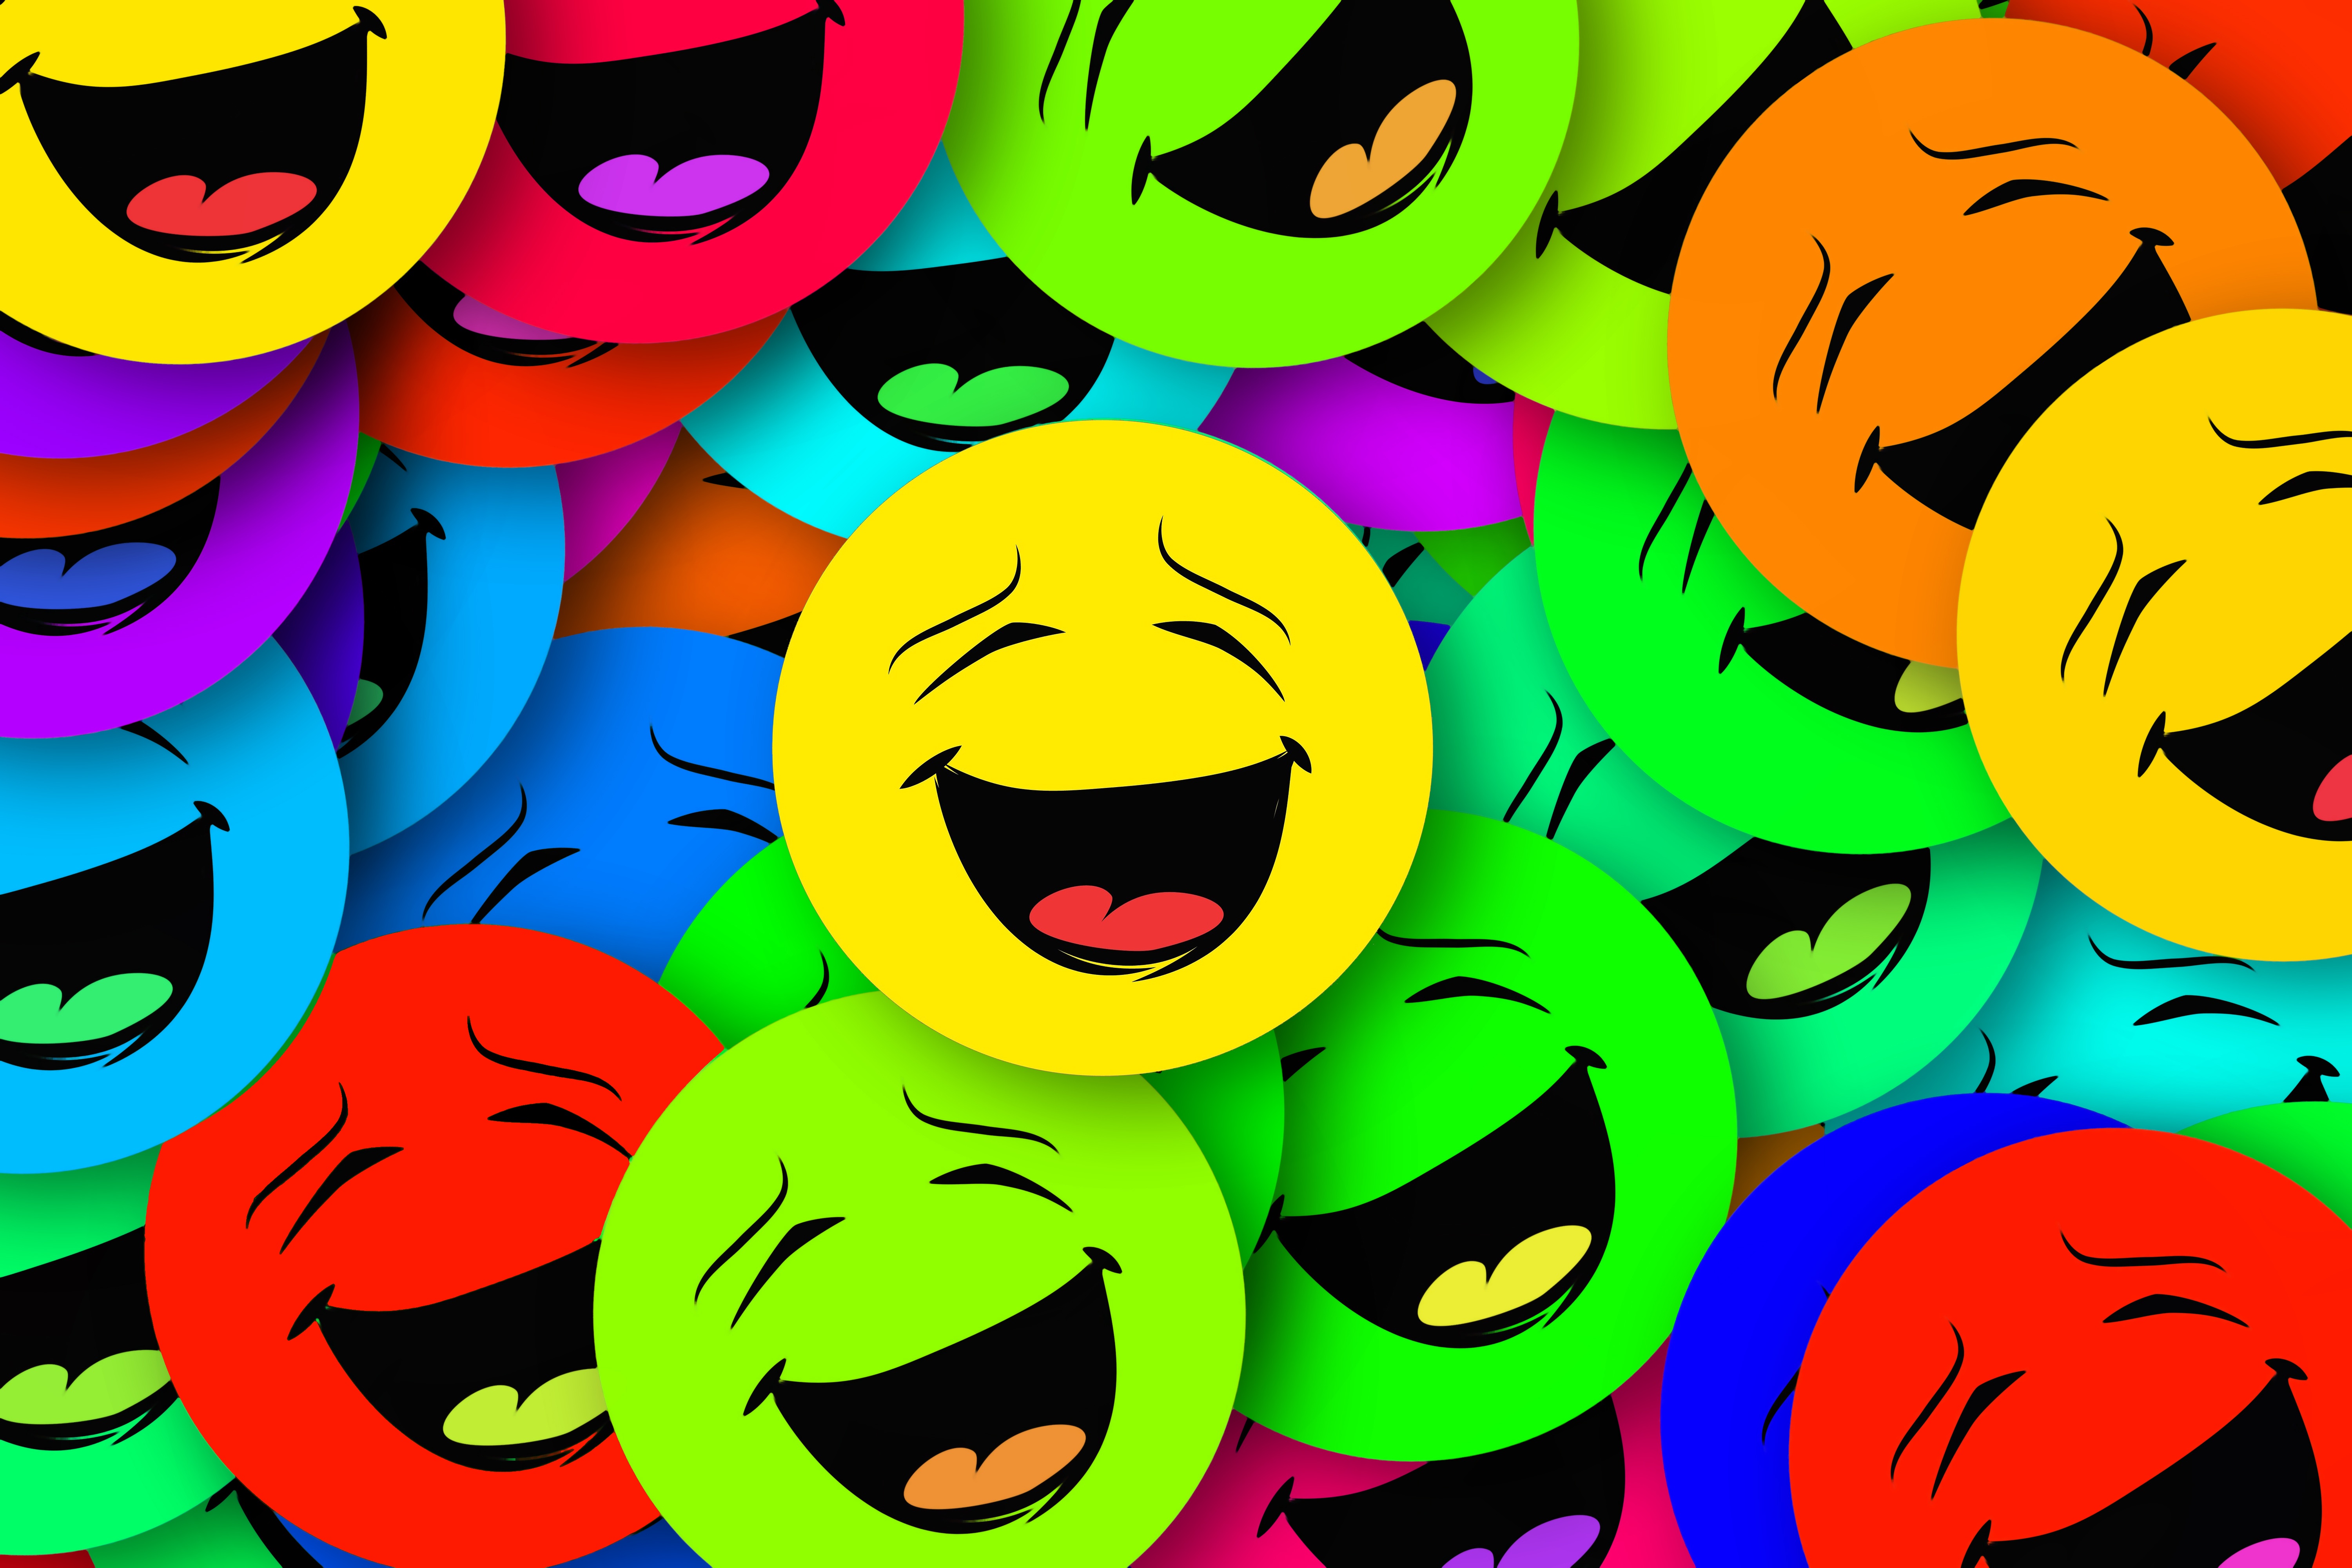 multicolored, miscellanea, smilies, smiles, smile, miscellaneous, motley, emotions for android